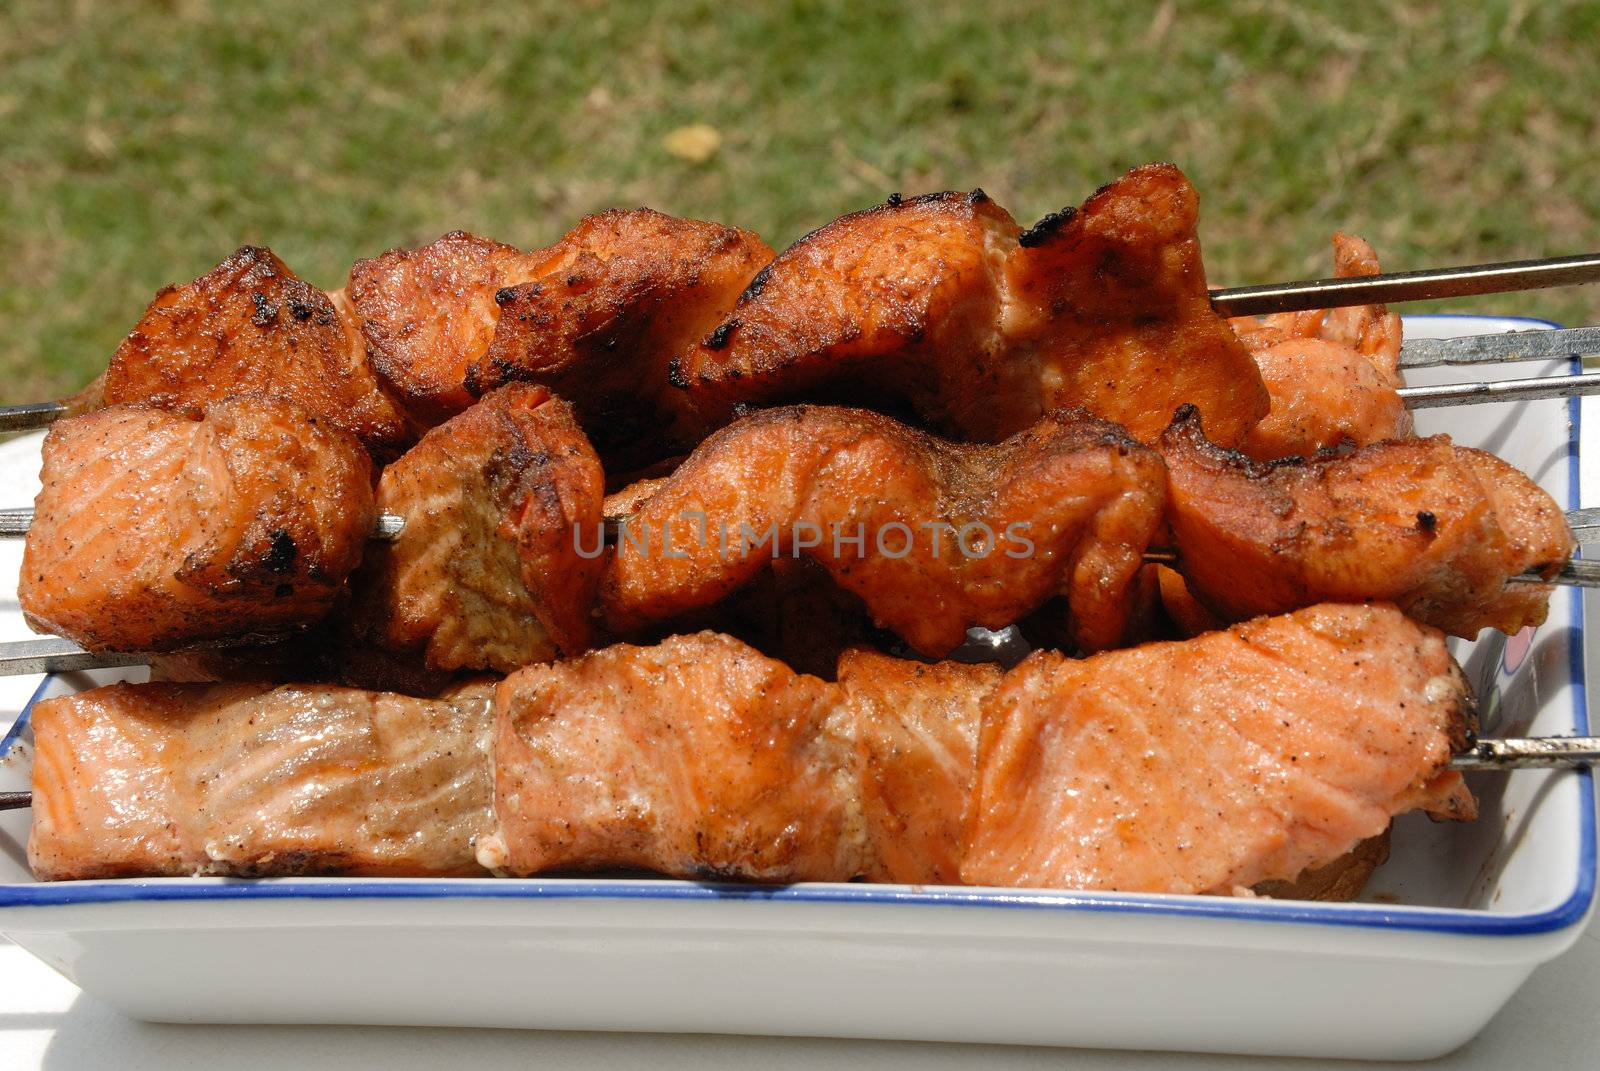 
Salmon is grilled in a white ceramic dish